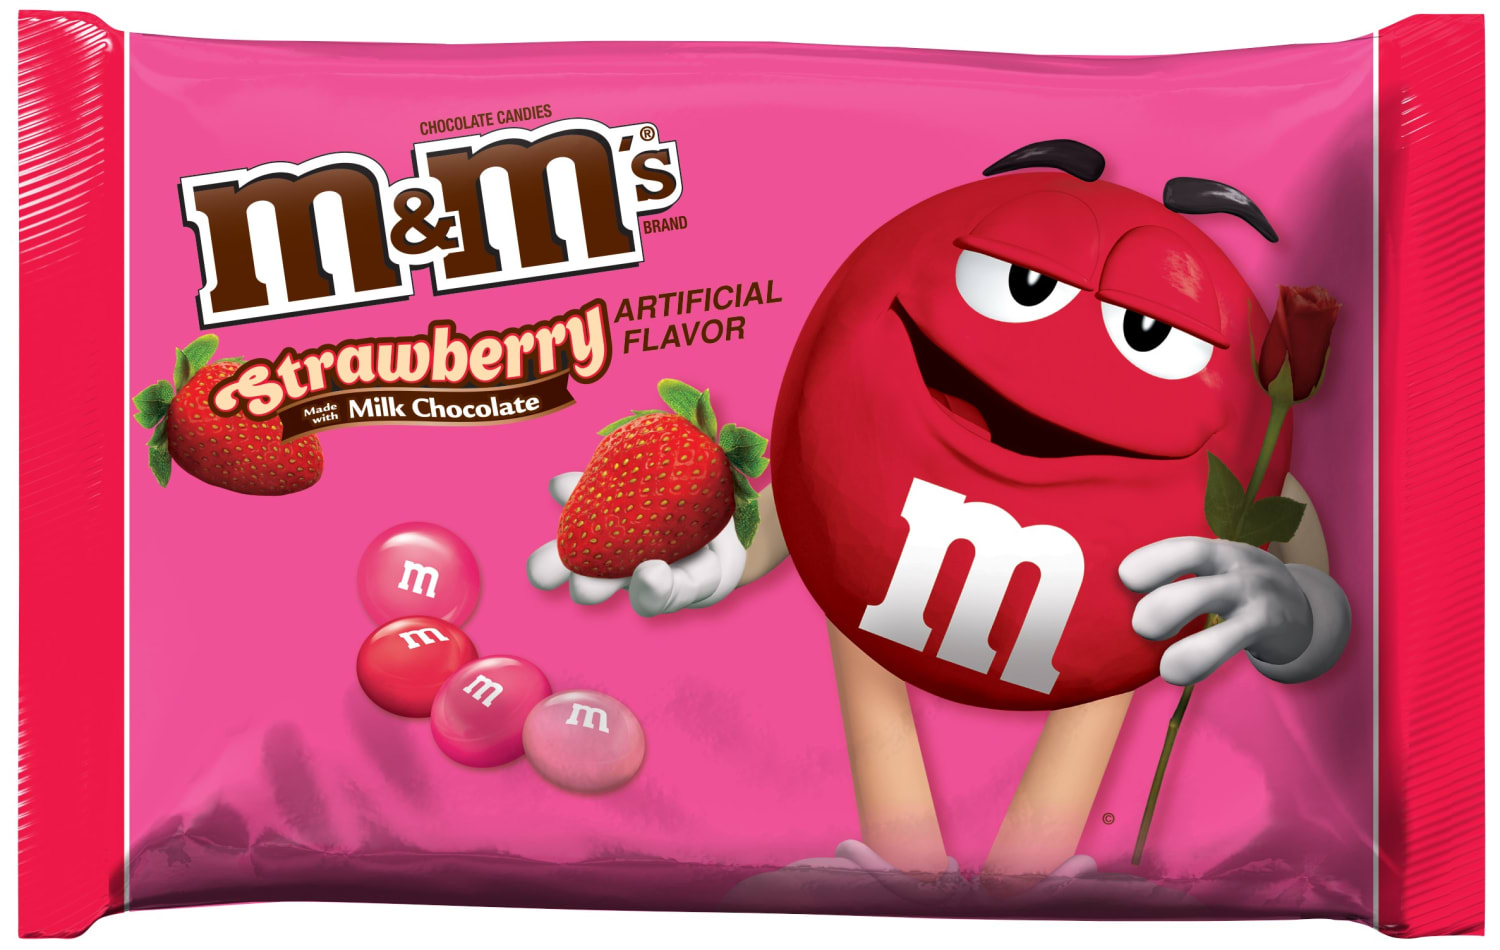 Get the scoop on the new flavors of M&M's and Milano cookies